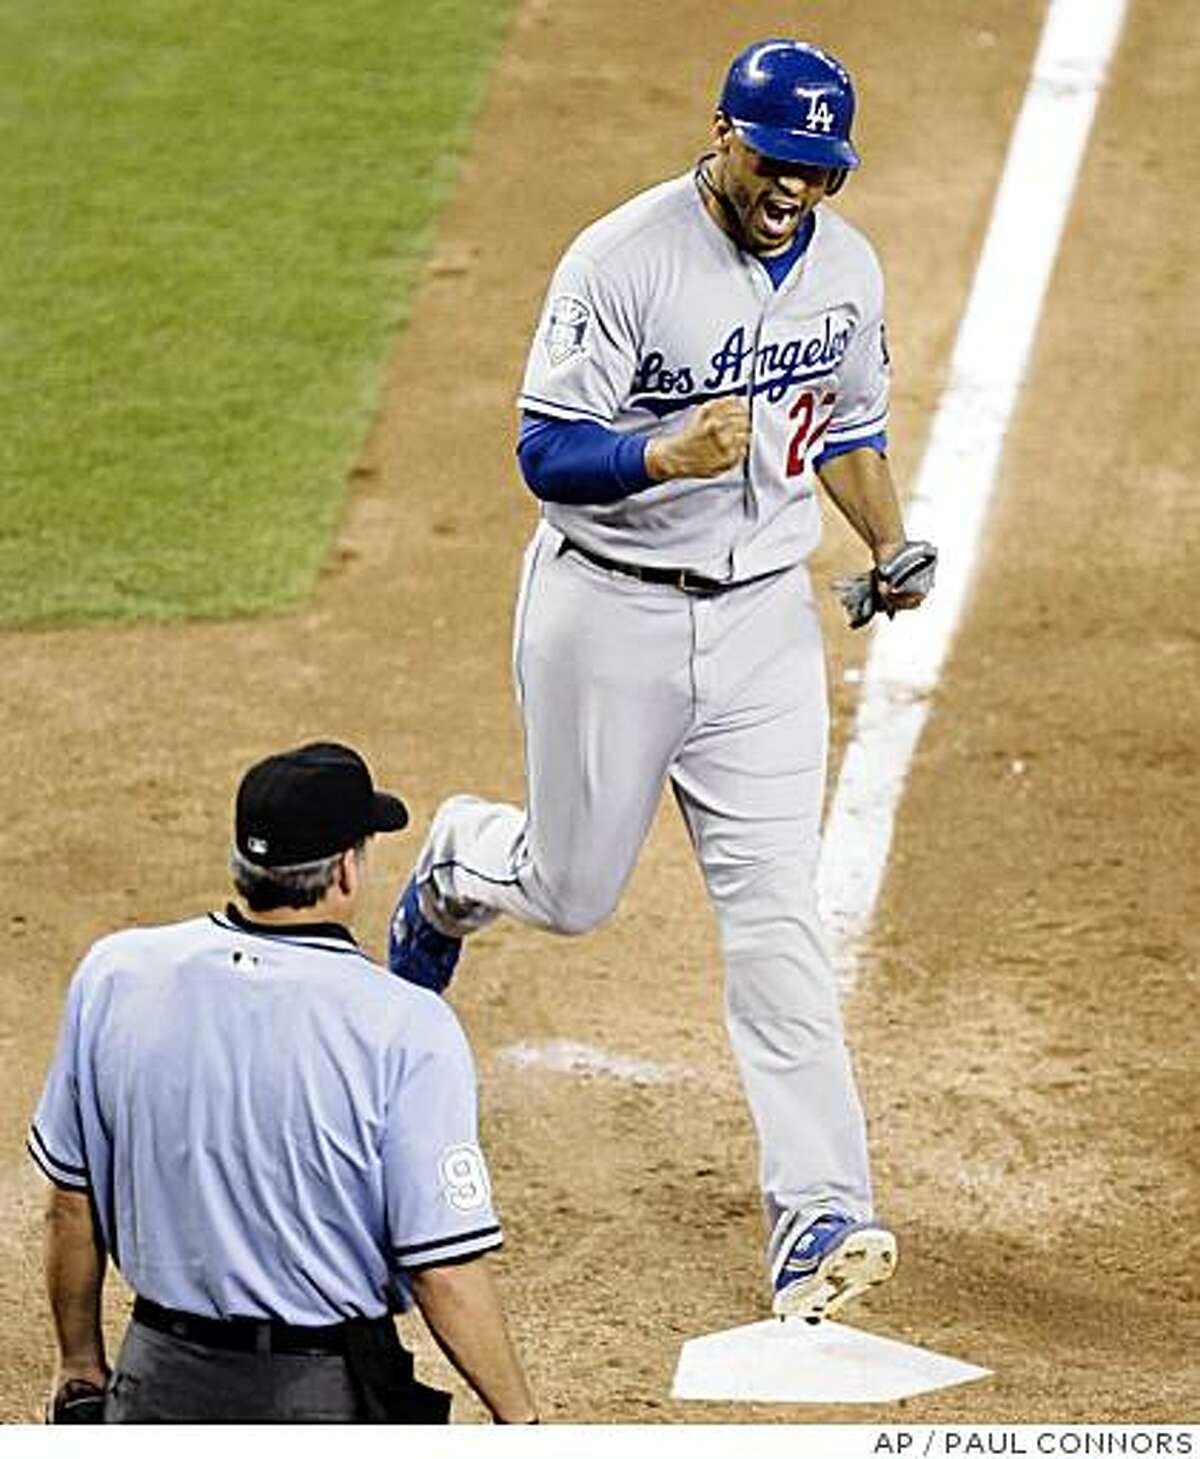 Los Angeles Dodgers' Matt Kemp, top, pumps his fist as he crosses home plate on an RBI-single hit by teammate Andre Ethier off Arizona Diamondbacks closer Brandon Lyon in the ninth inning of a baseball game Sunday, July 20, 2008, in Phoenix. The Dodgers scored five runs in the ninth to win 6-5. (AP Photo/Paul Connors)